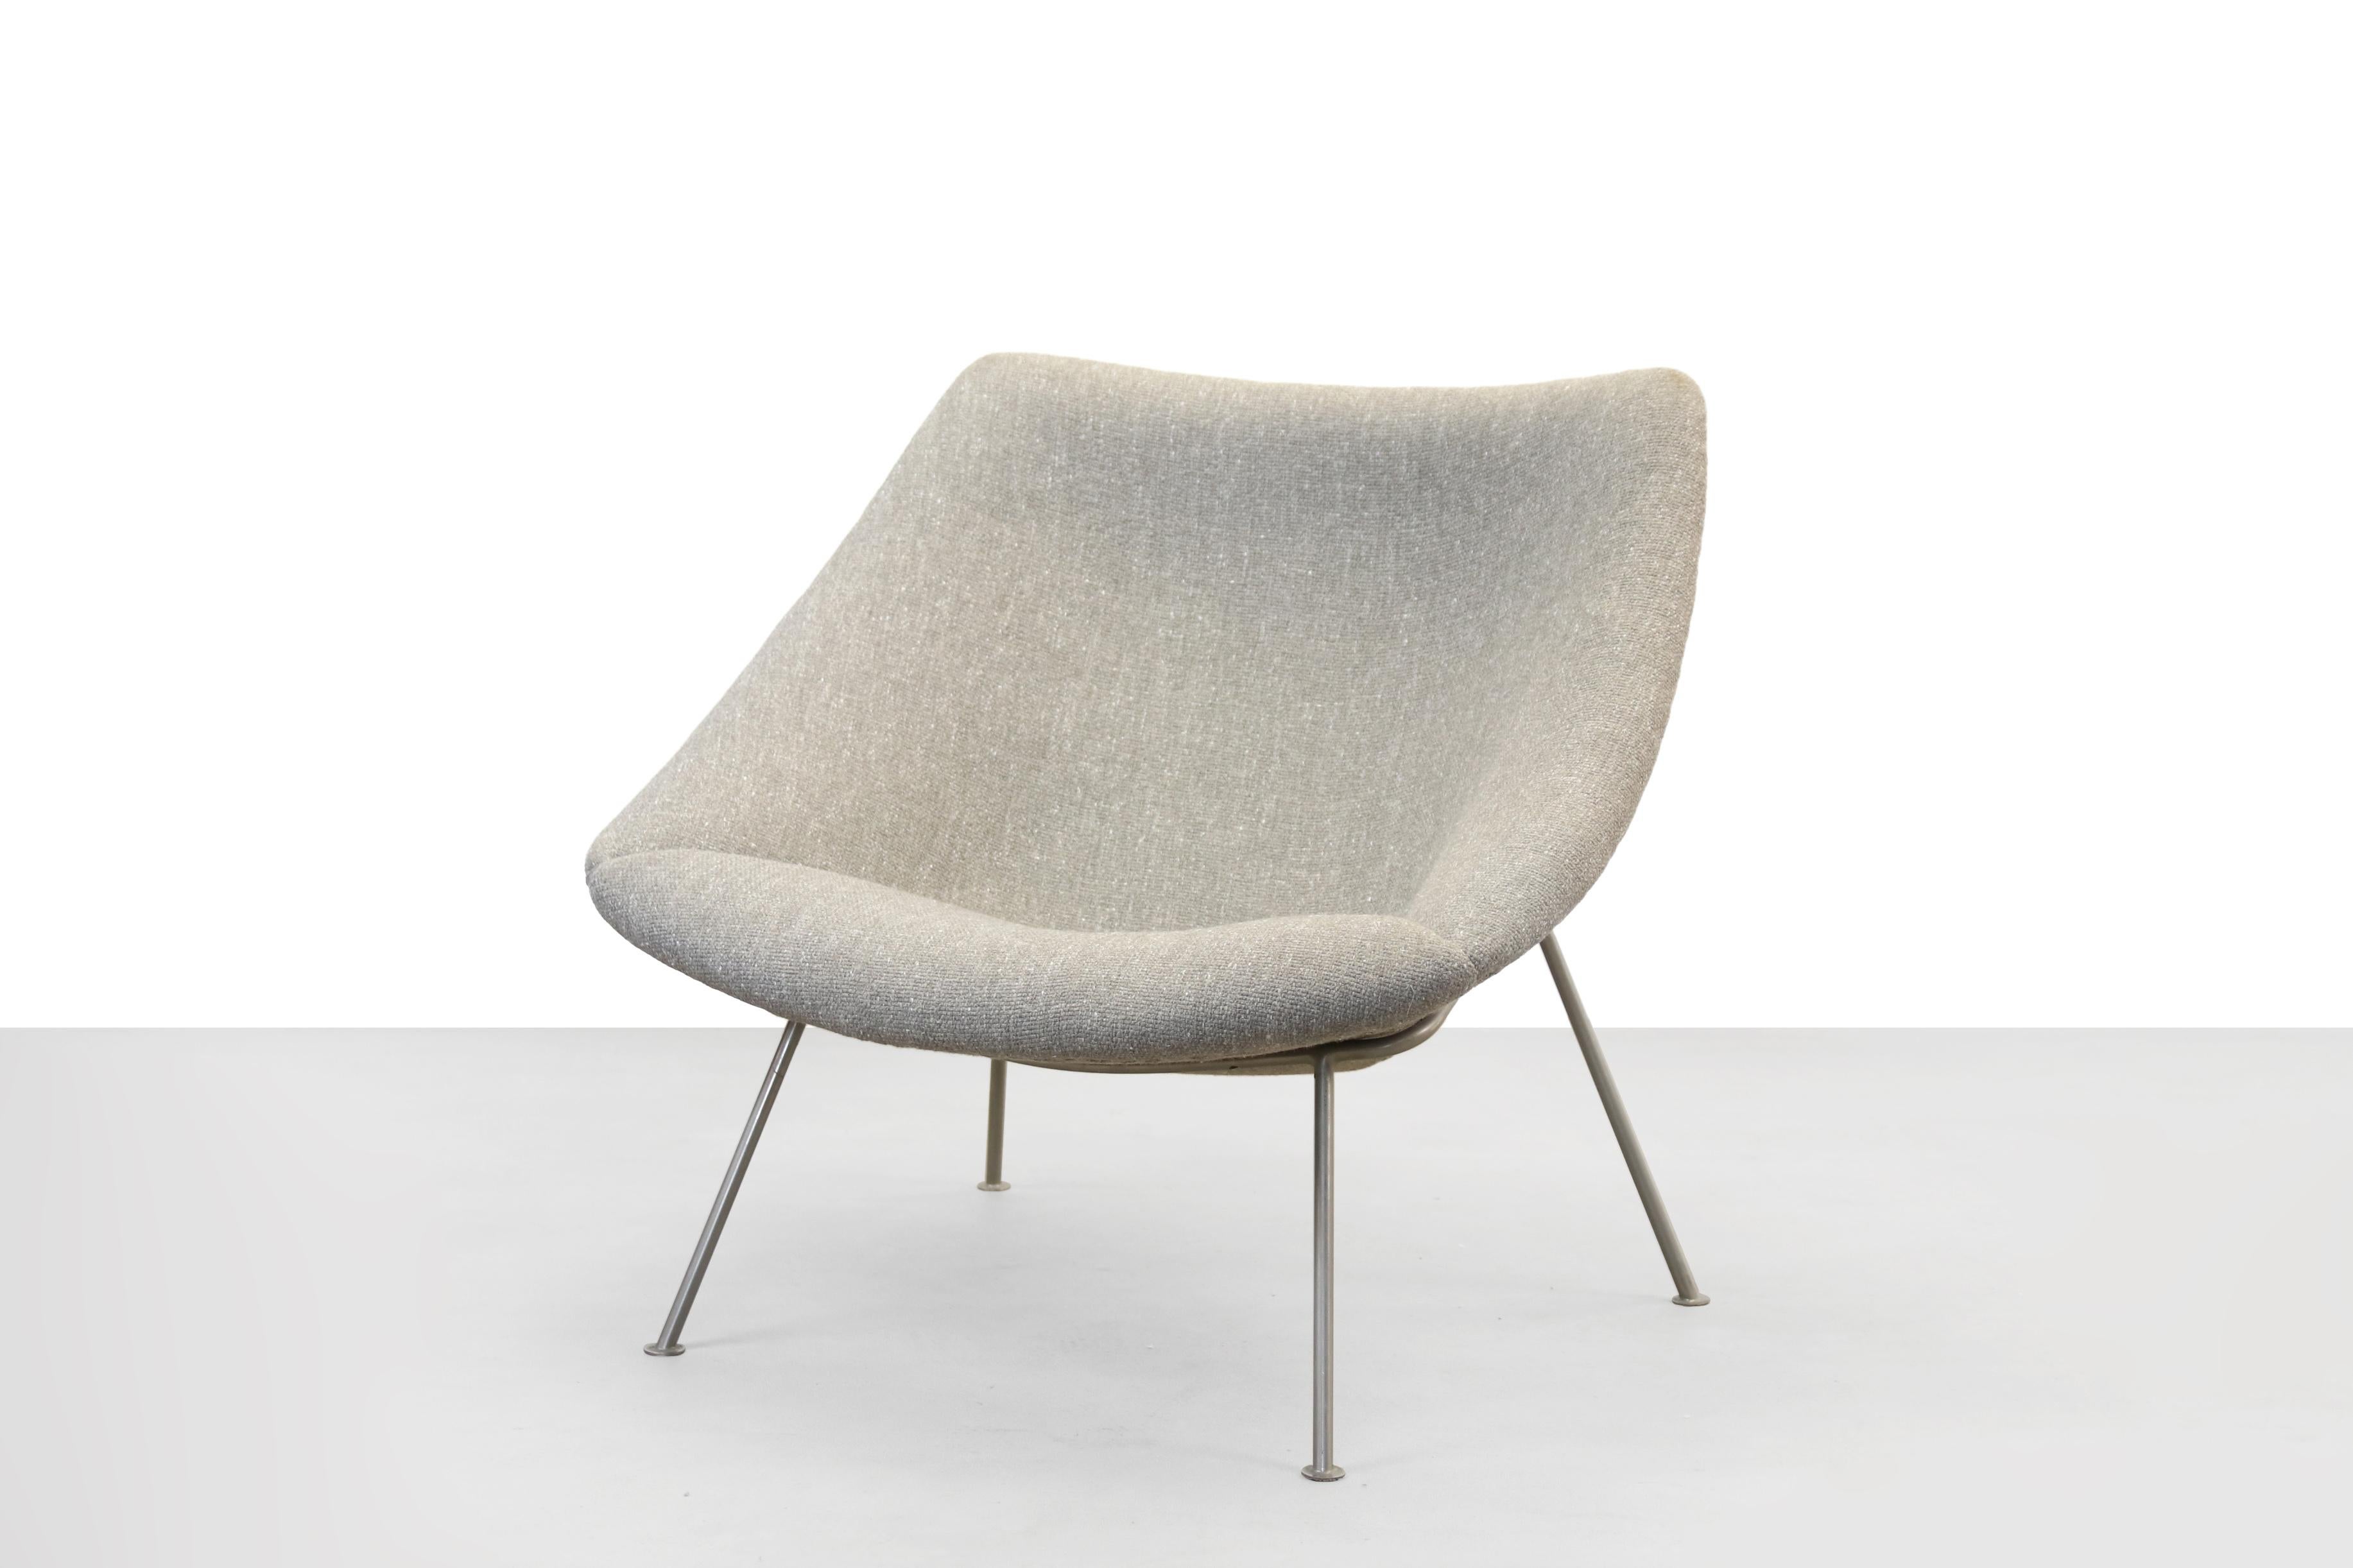 Beautiful reupholstered F157 armchair, designed by Pierre Paulin for Artifort. This chair has new foam and beautiful coarse gray beige upholstery fabric. The armchair is upholstered in the old way with blind stitch and stands on a nickel-plated